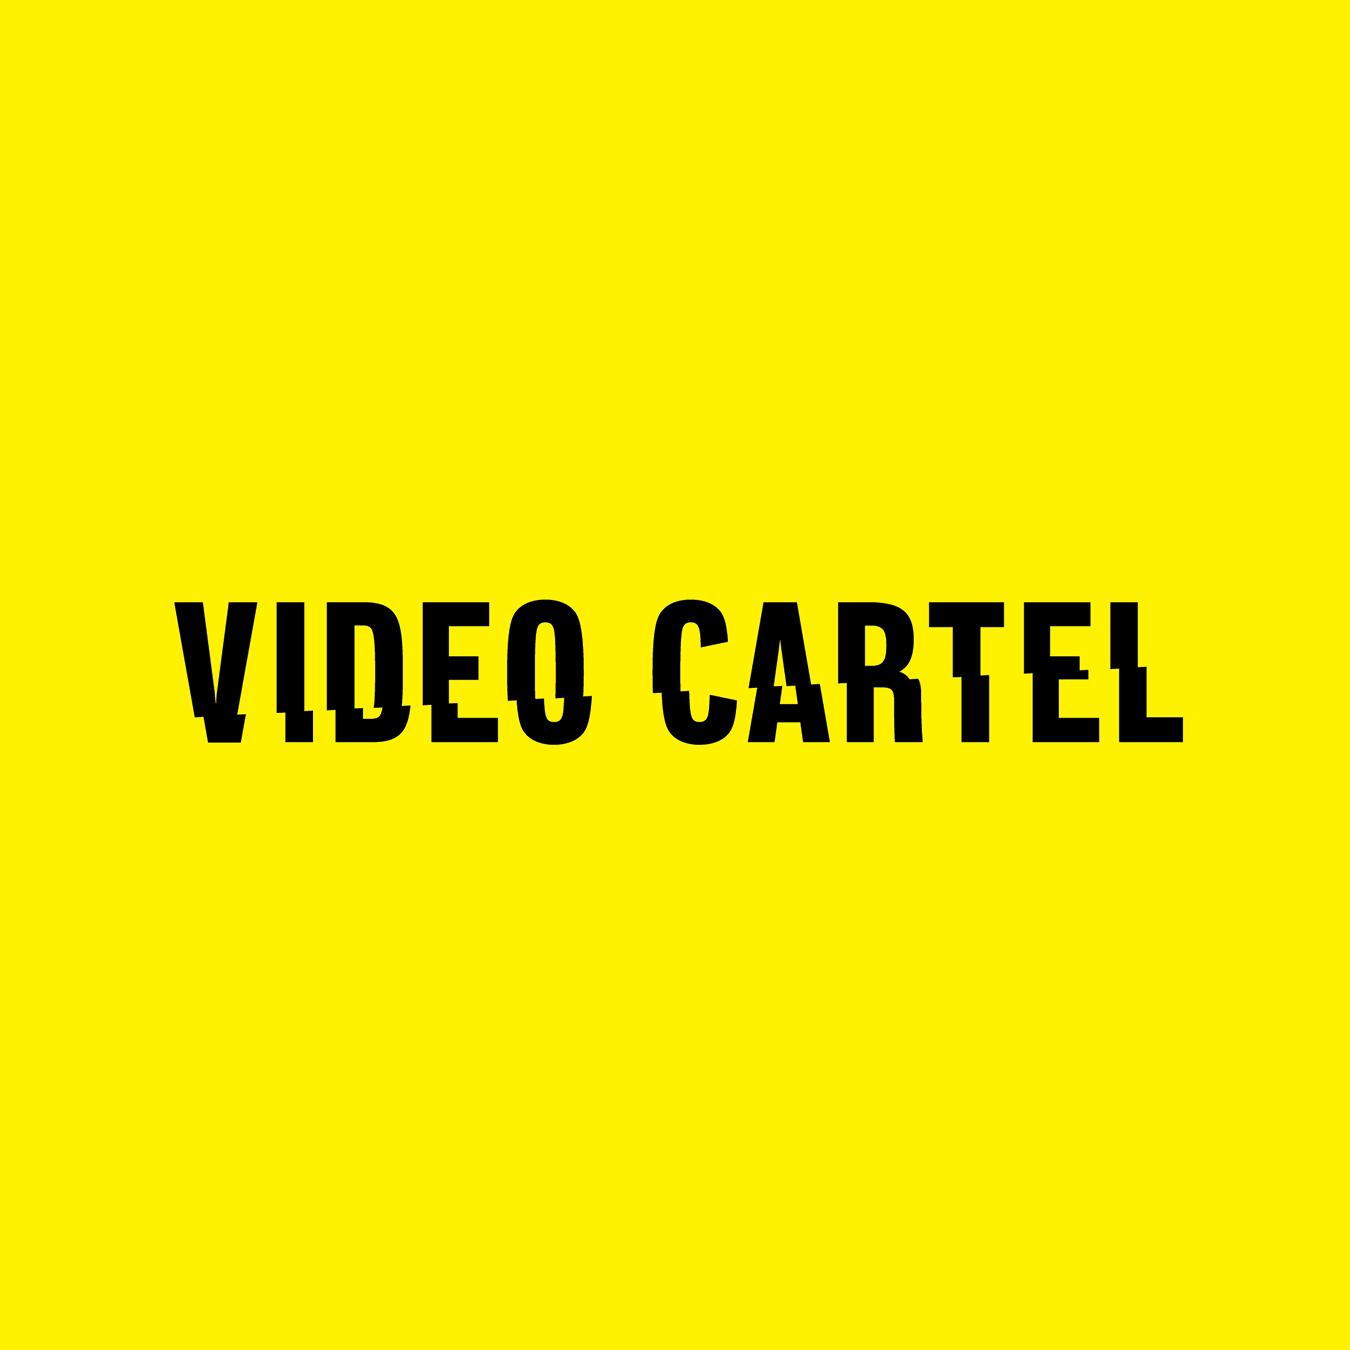 The Video Cartel